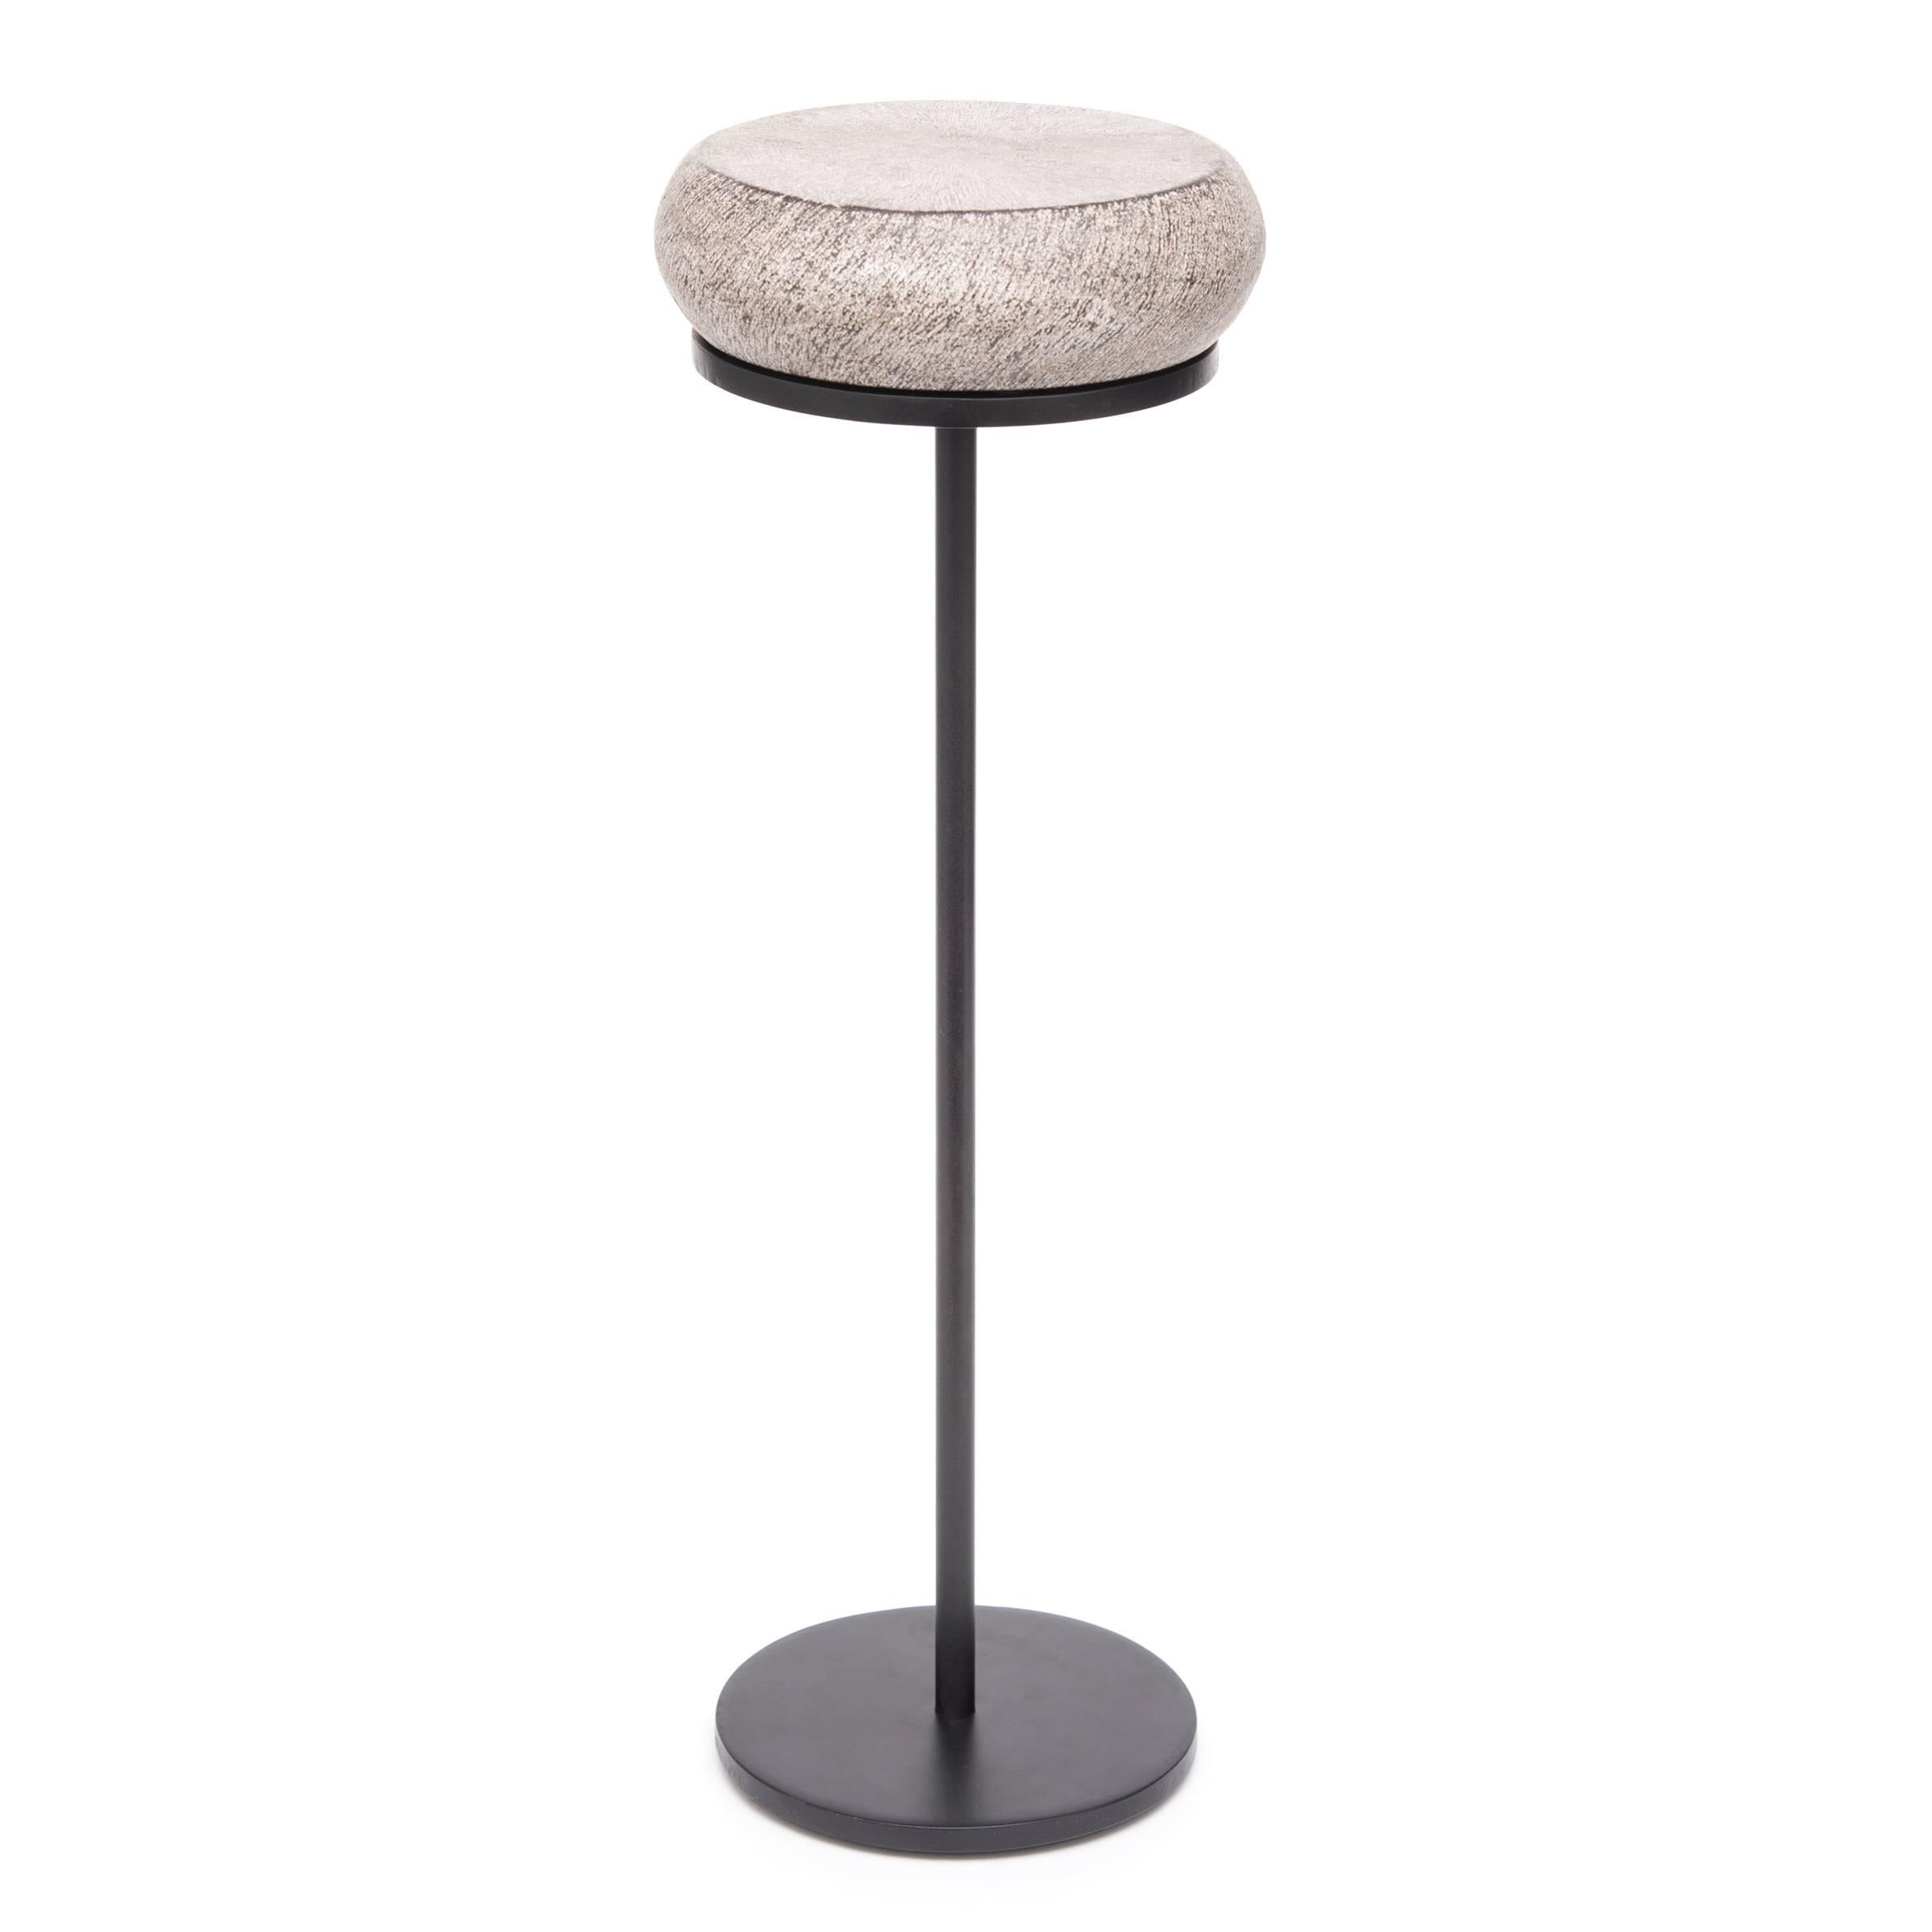 Traditional Chinese stone furniture-makers frequently mimicked drums in their carving forms. The shape featured in this petite drum table references a traditional hand held fish drum. In Taoist mythology the fish drum was the symbol of Zhang Guolao,